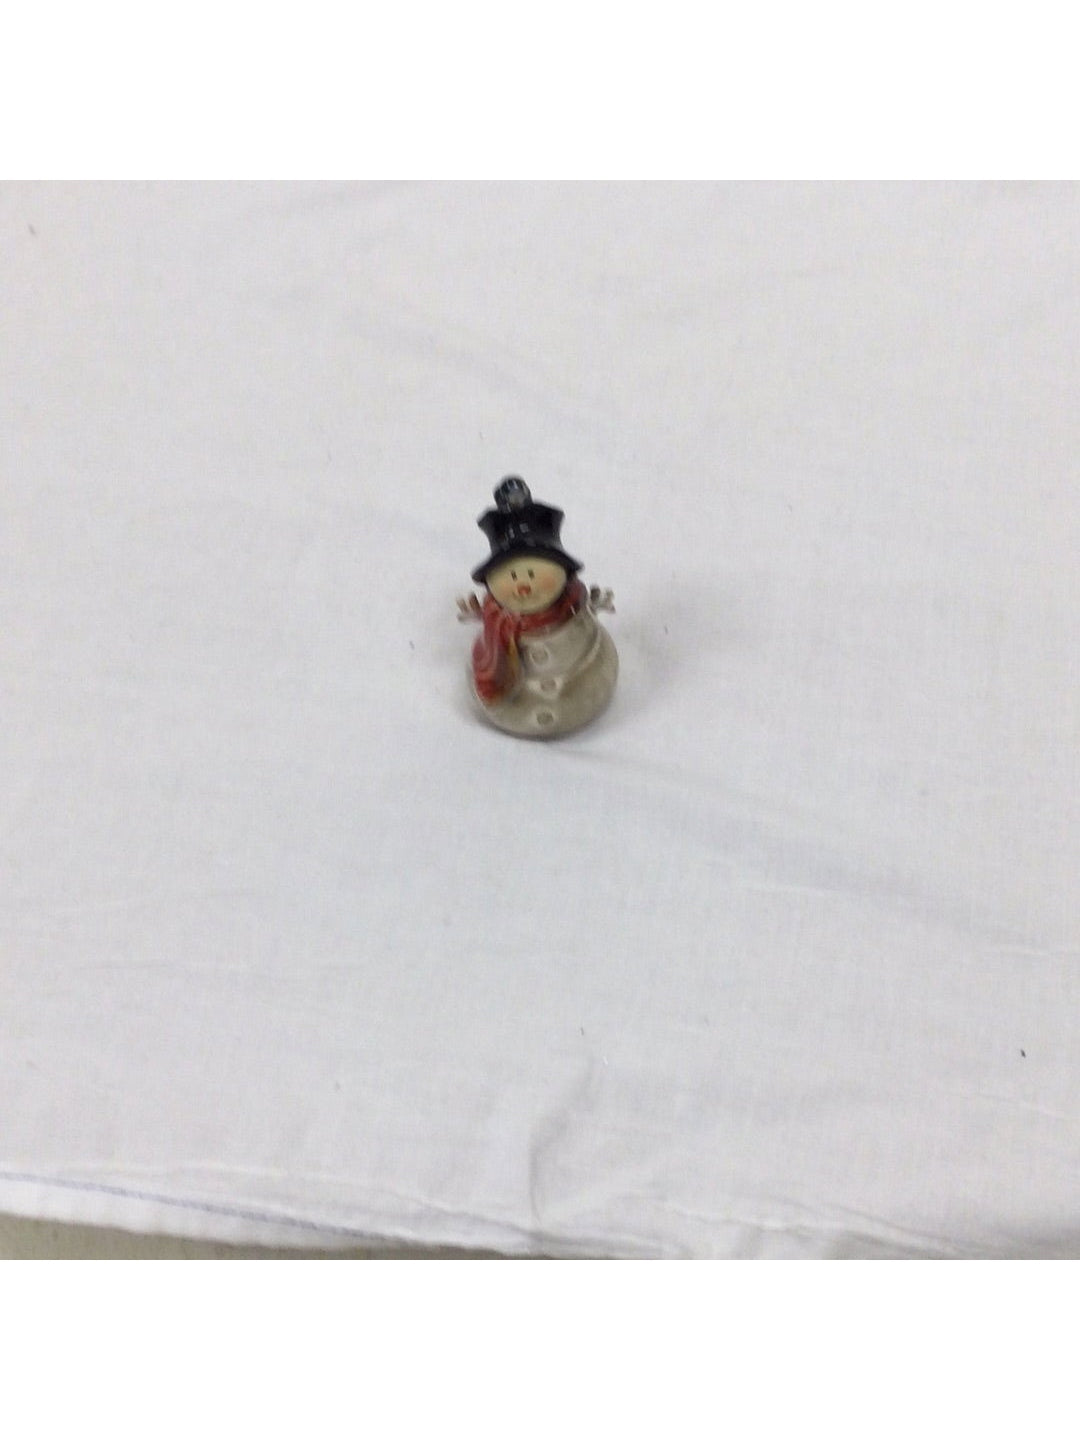 Jolly Snowman Figurine - The Kennedy Collective Thrift - 